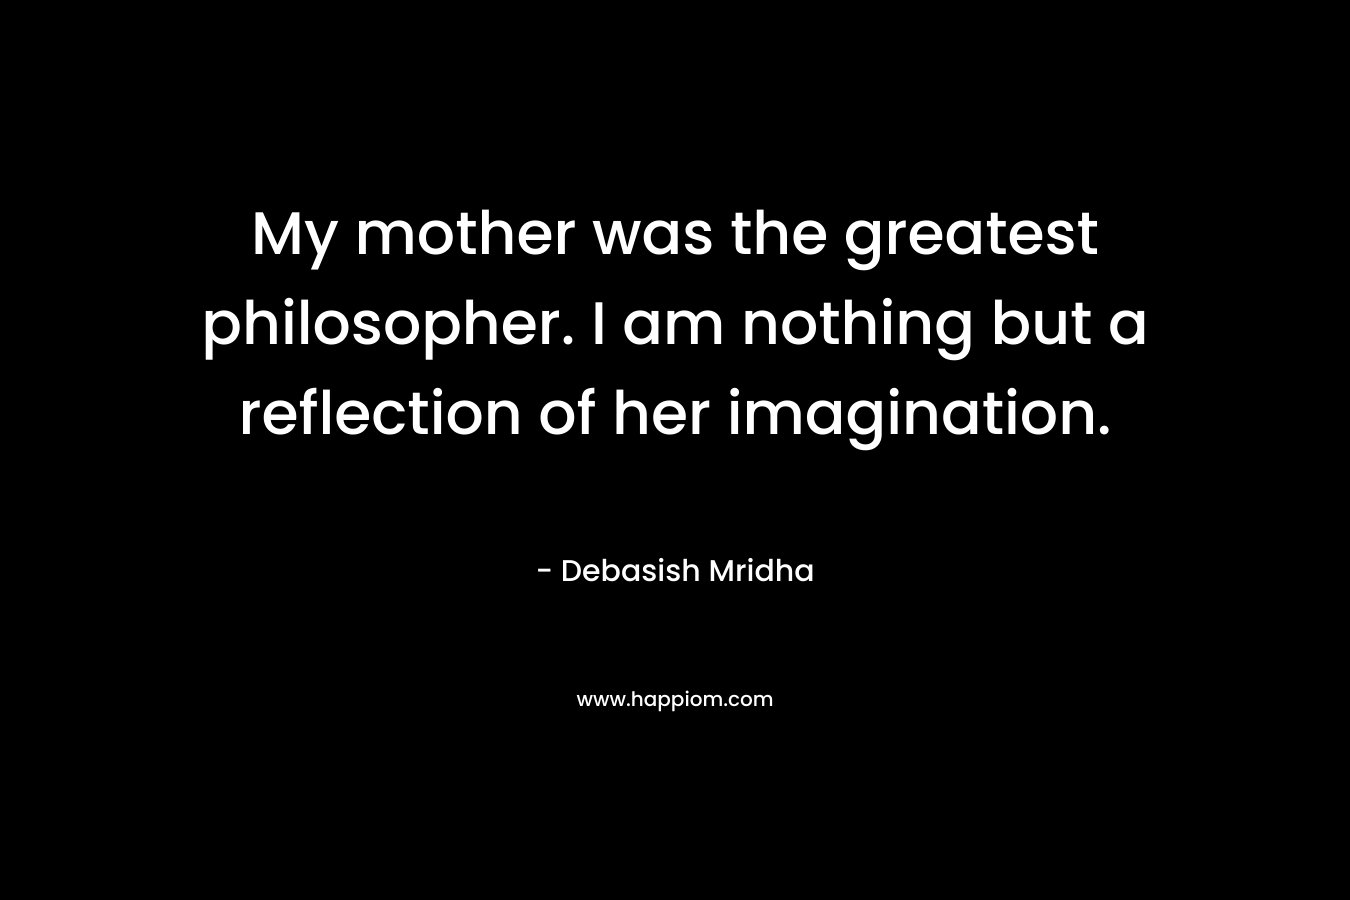 My mother was the greatest philosopher. I am nothing but a reflection of her imagination. – Debasish Mridha